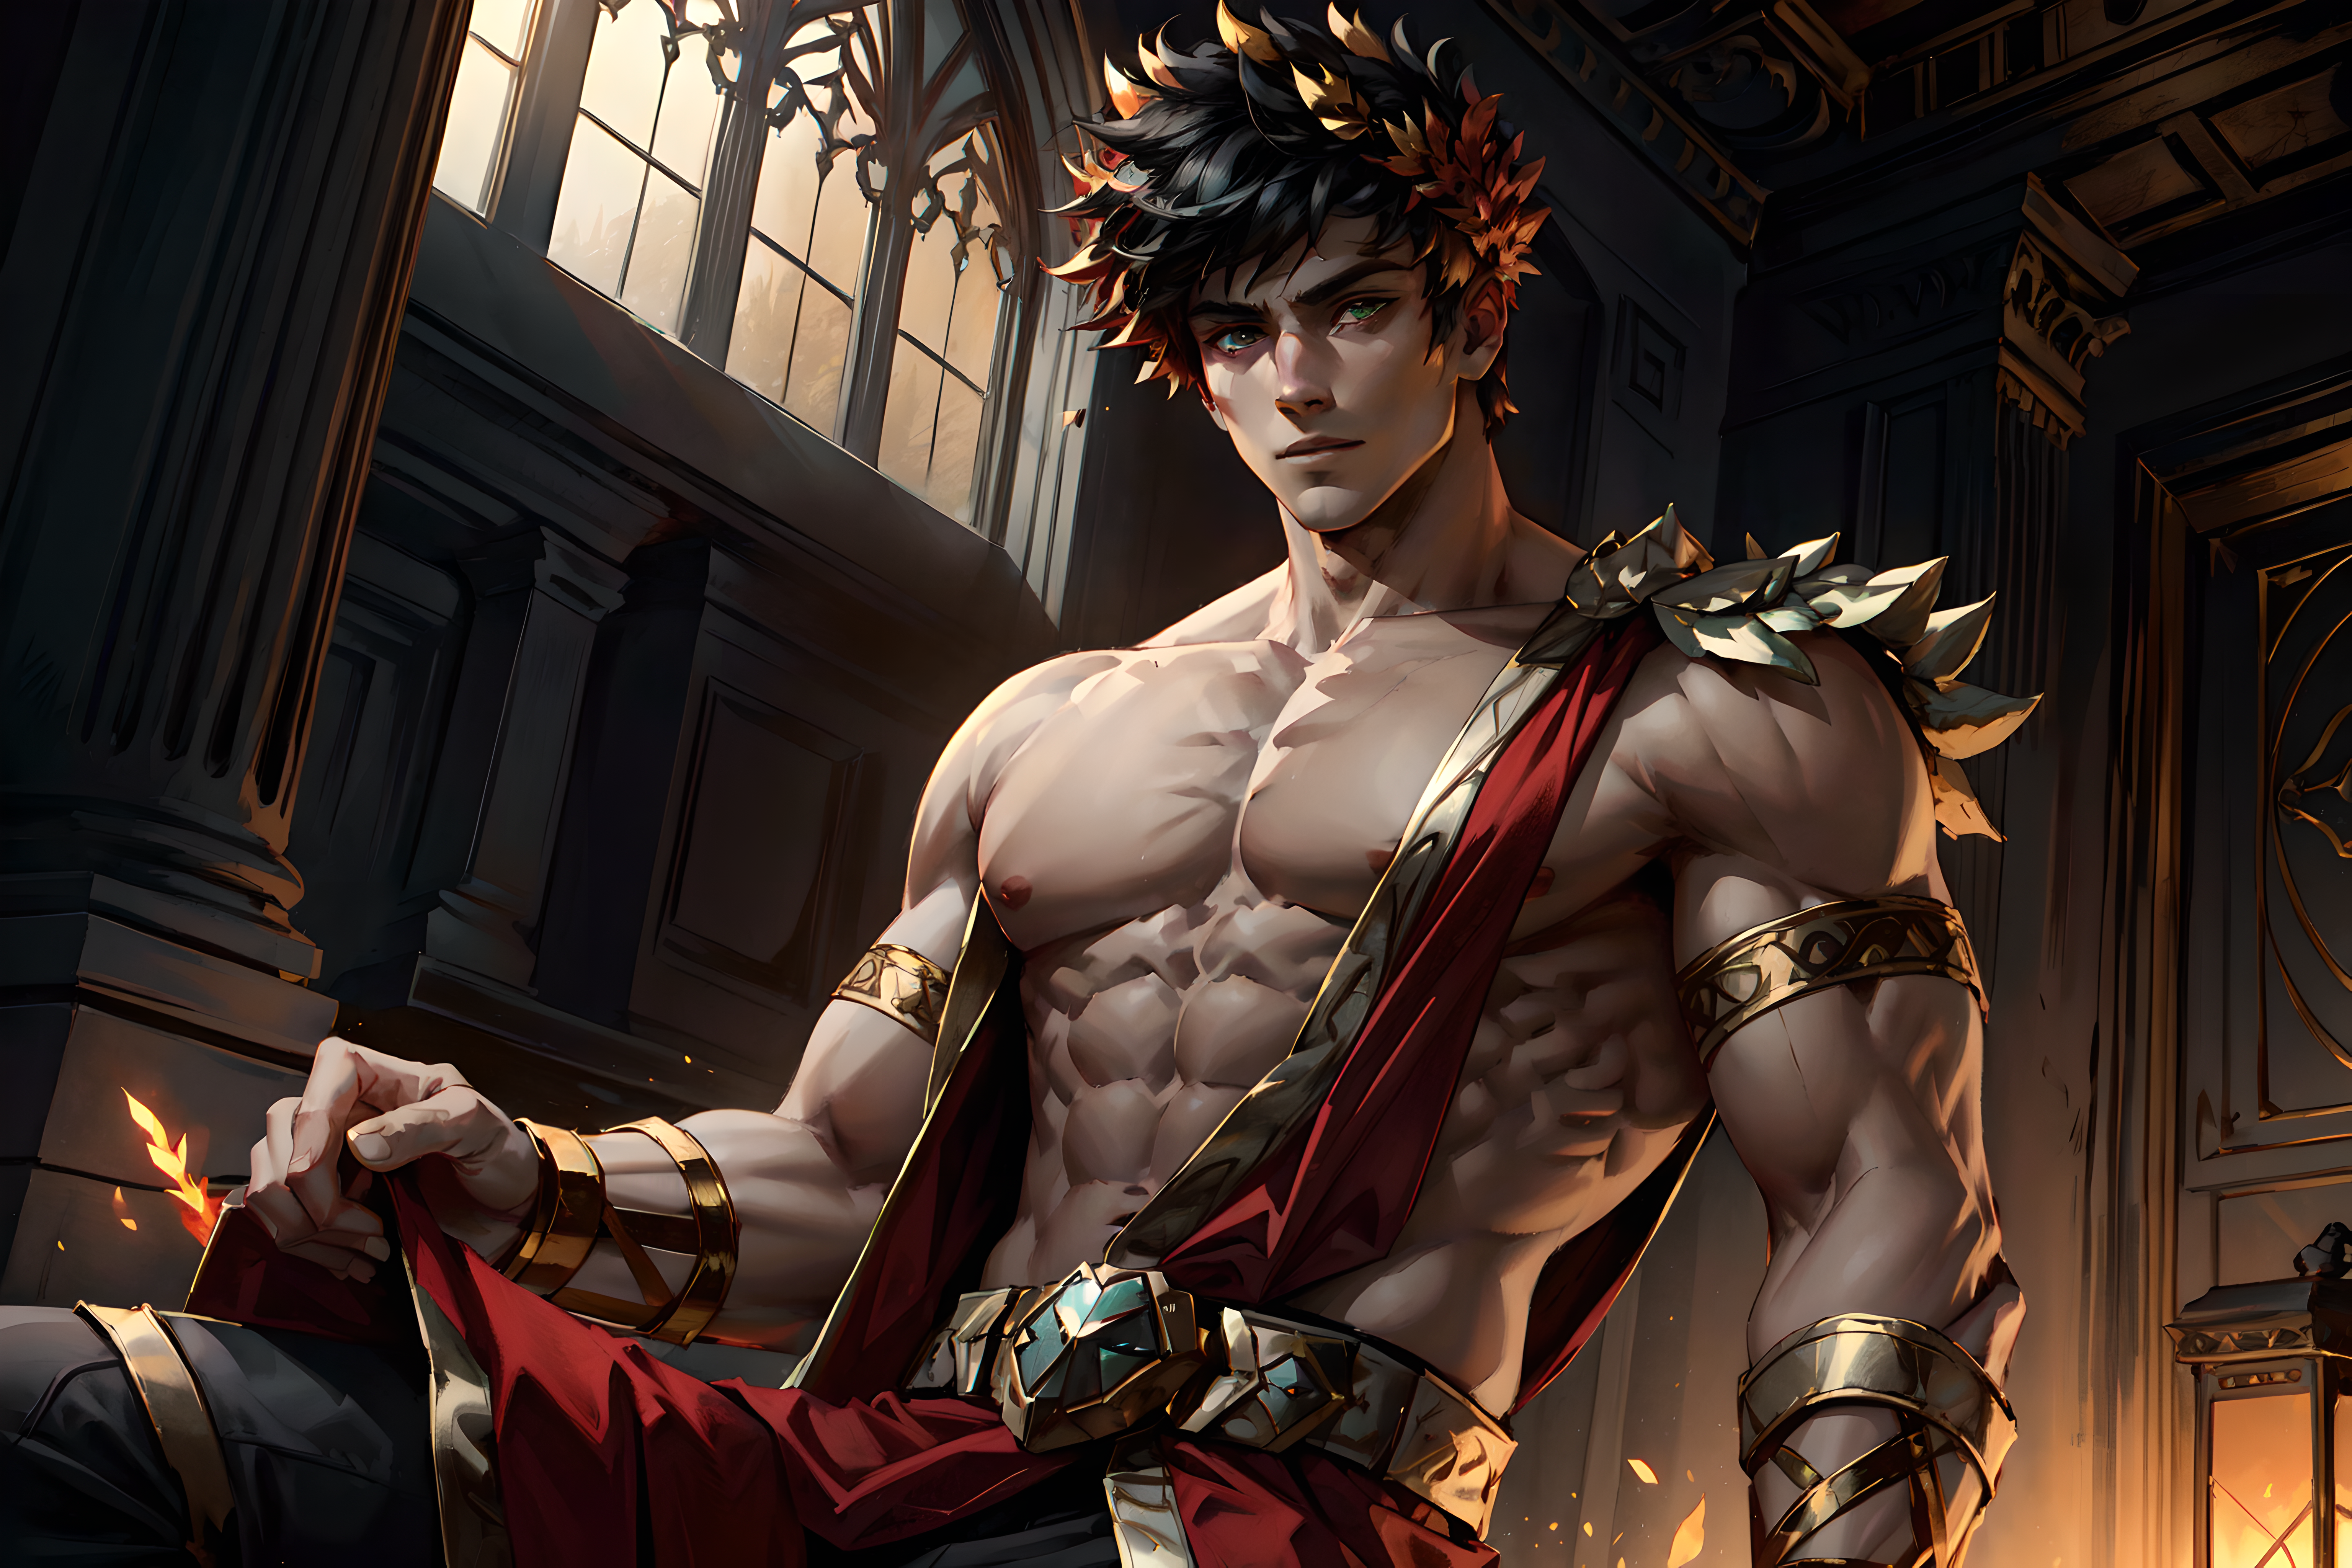 Zagreus from Hades image by missfidonyo